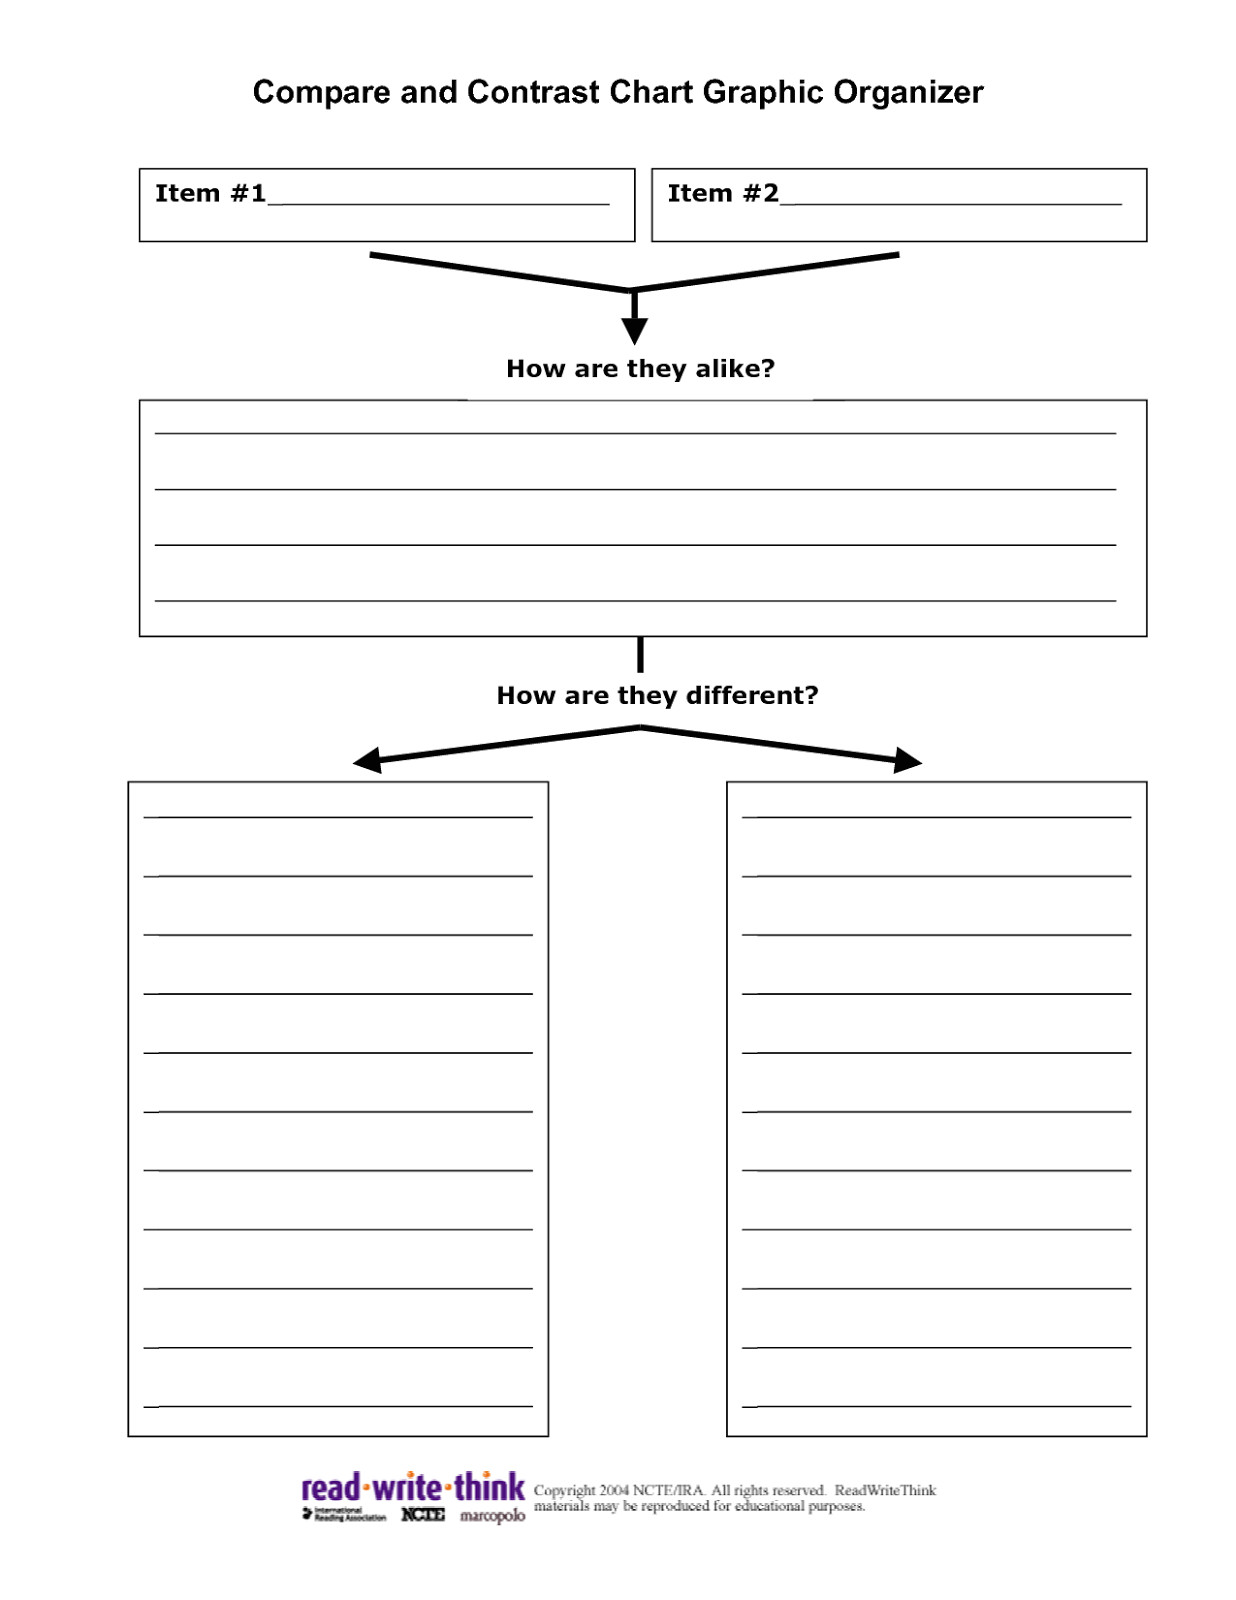 in praise of graphic organizers